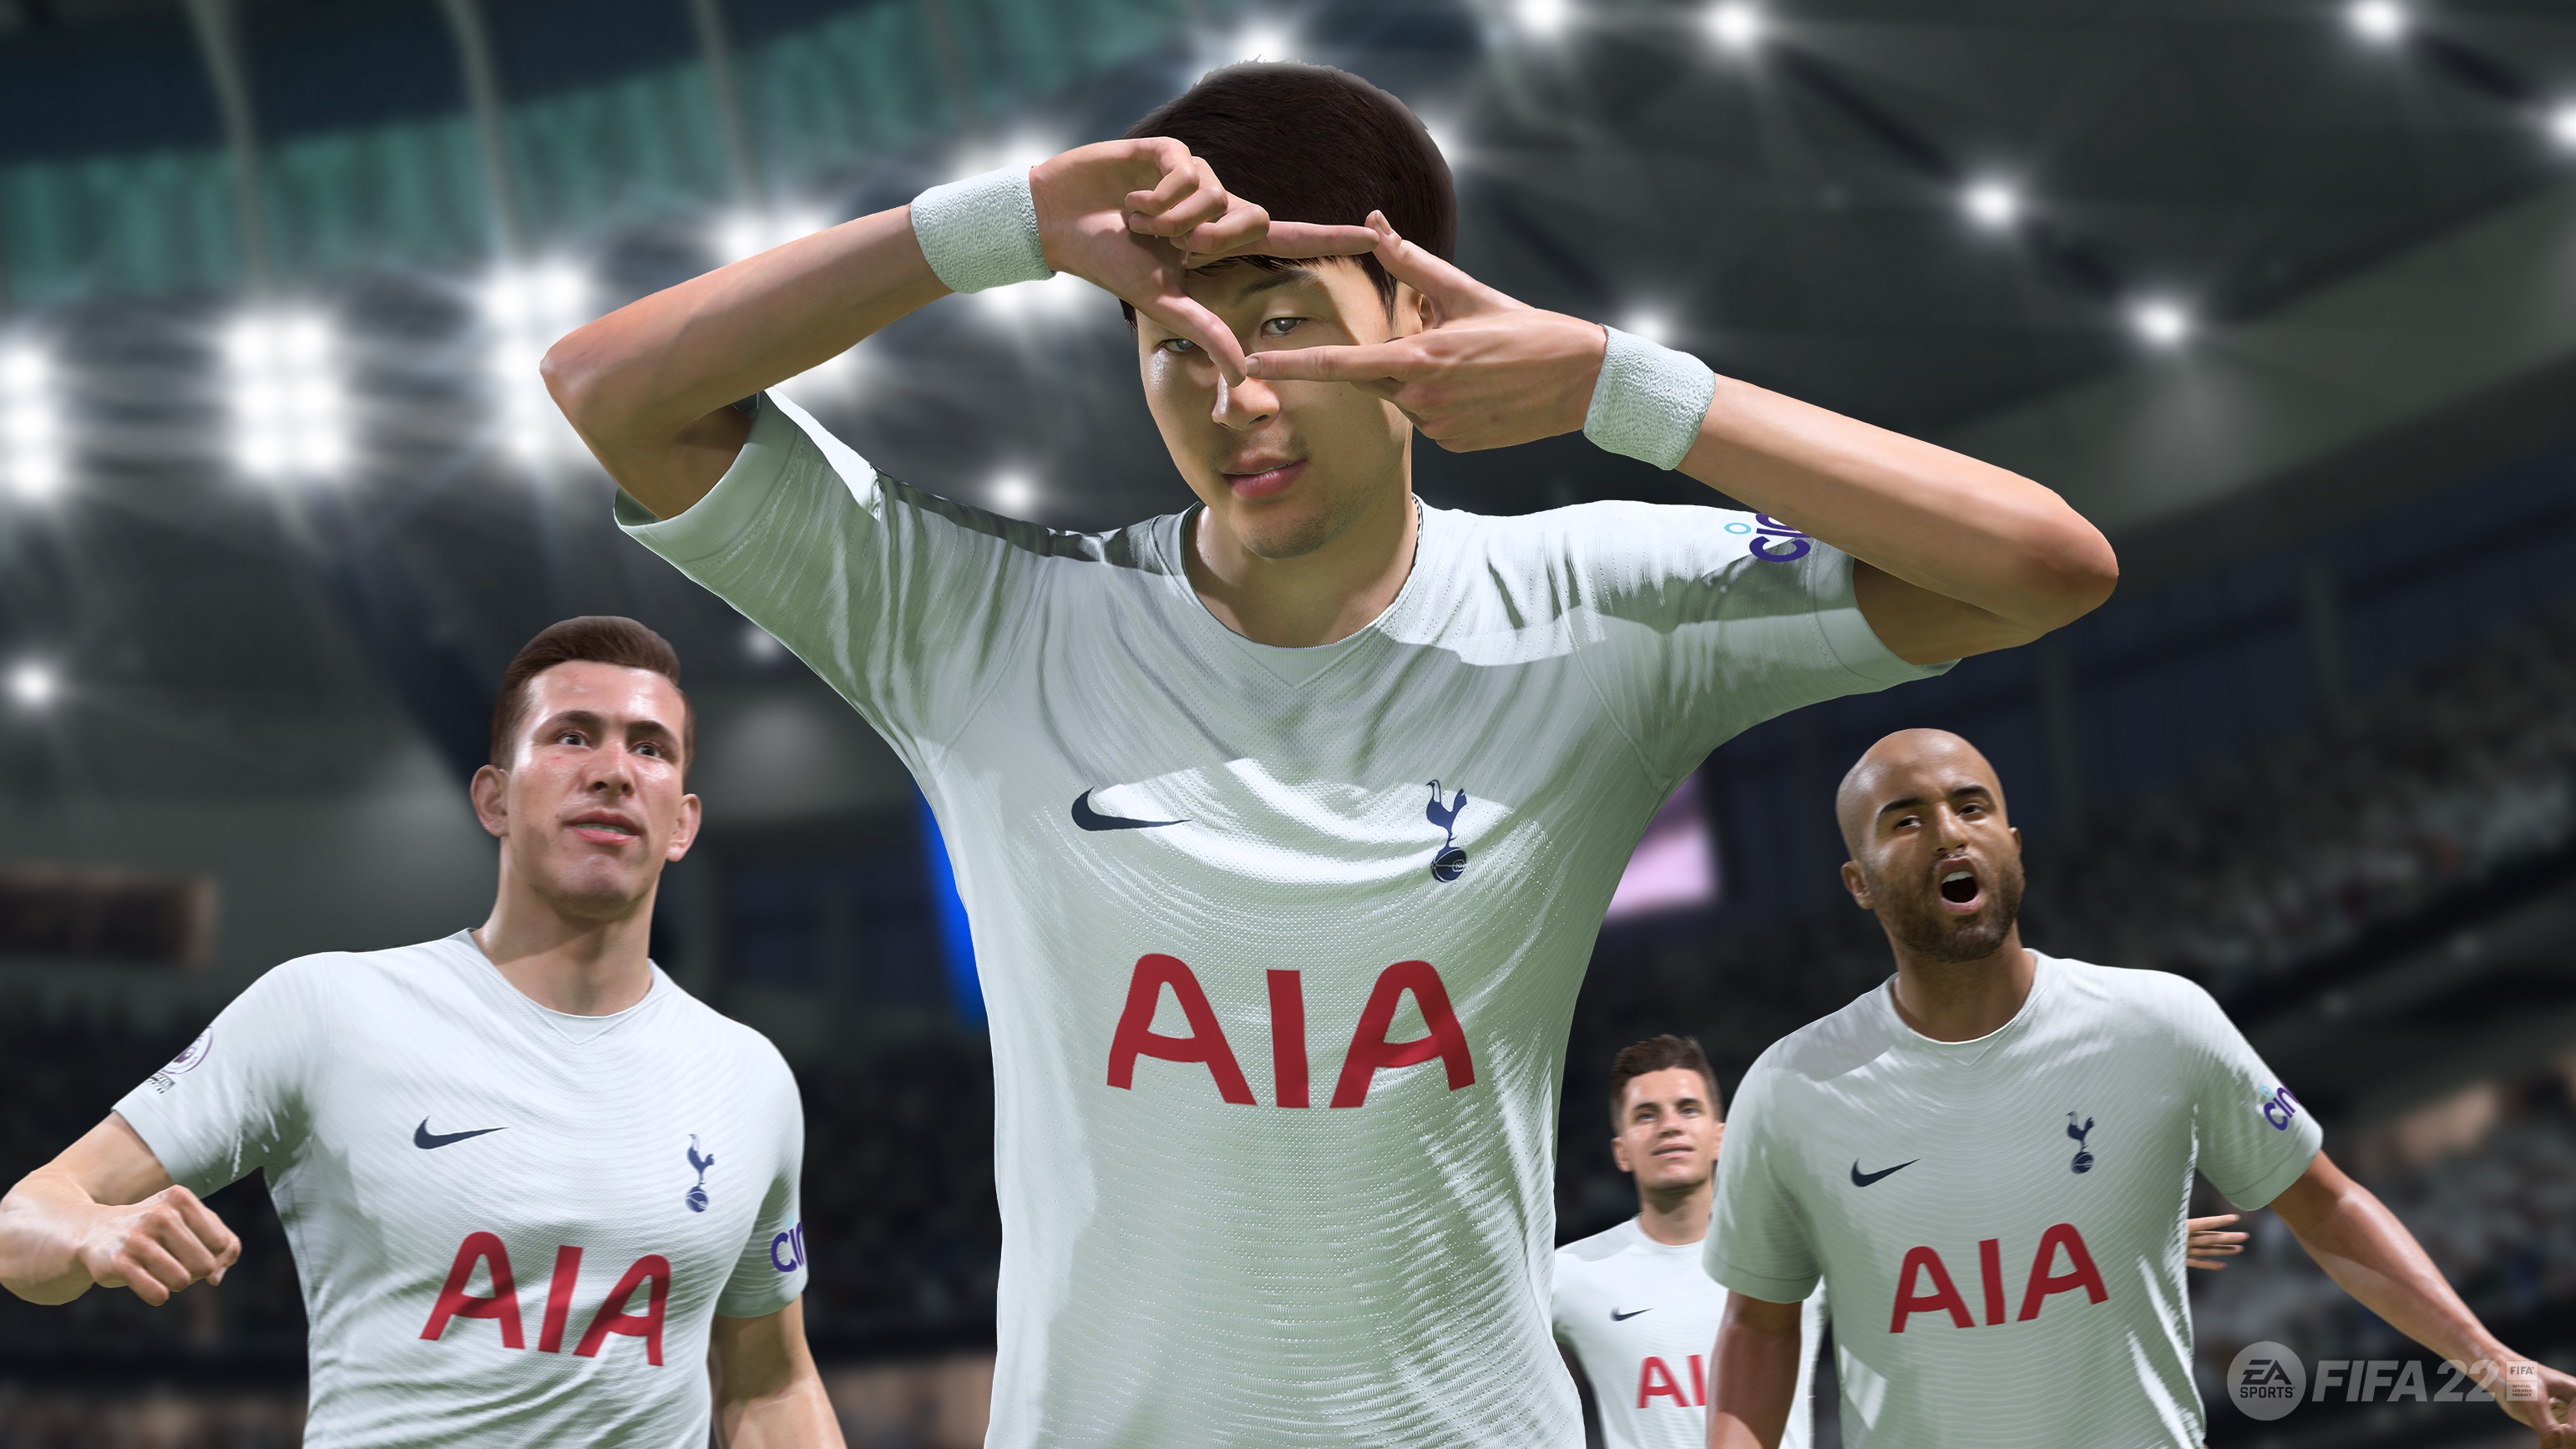 FIFA 22 may be last paid-for entry as FIFA 23 goes free-to-play claims rumour